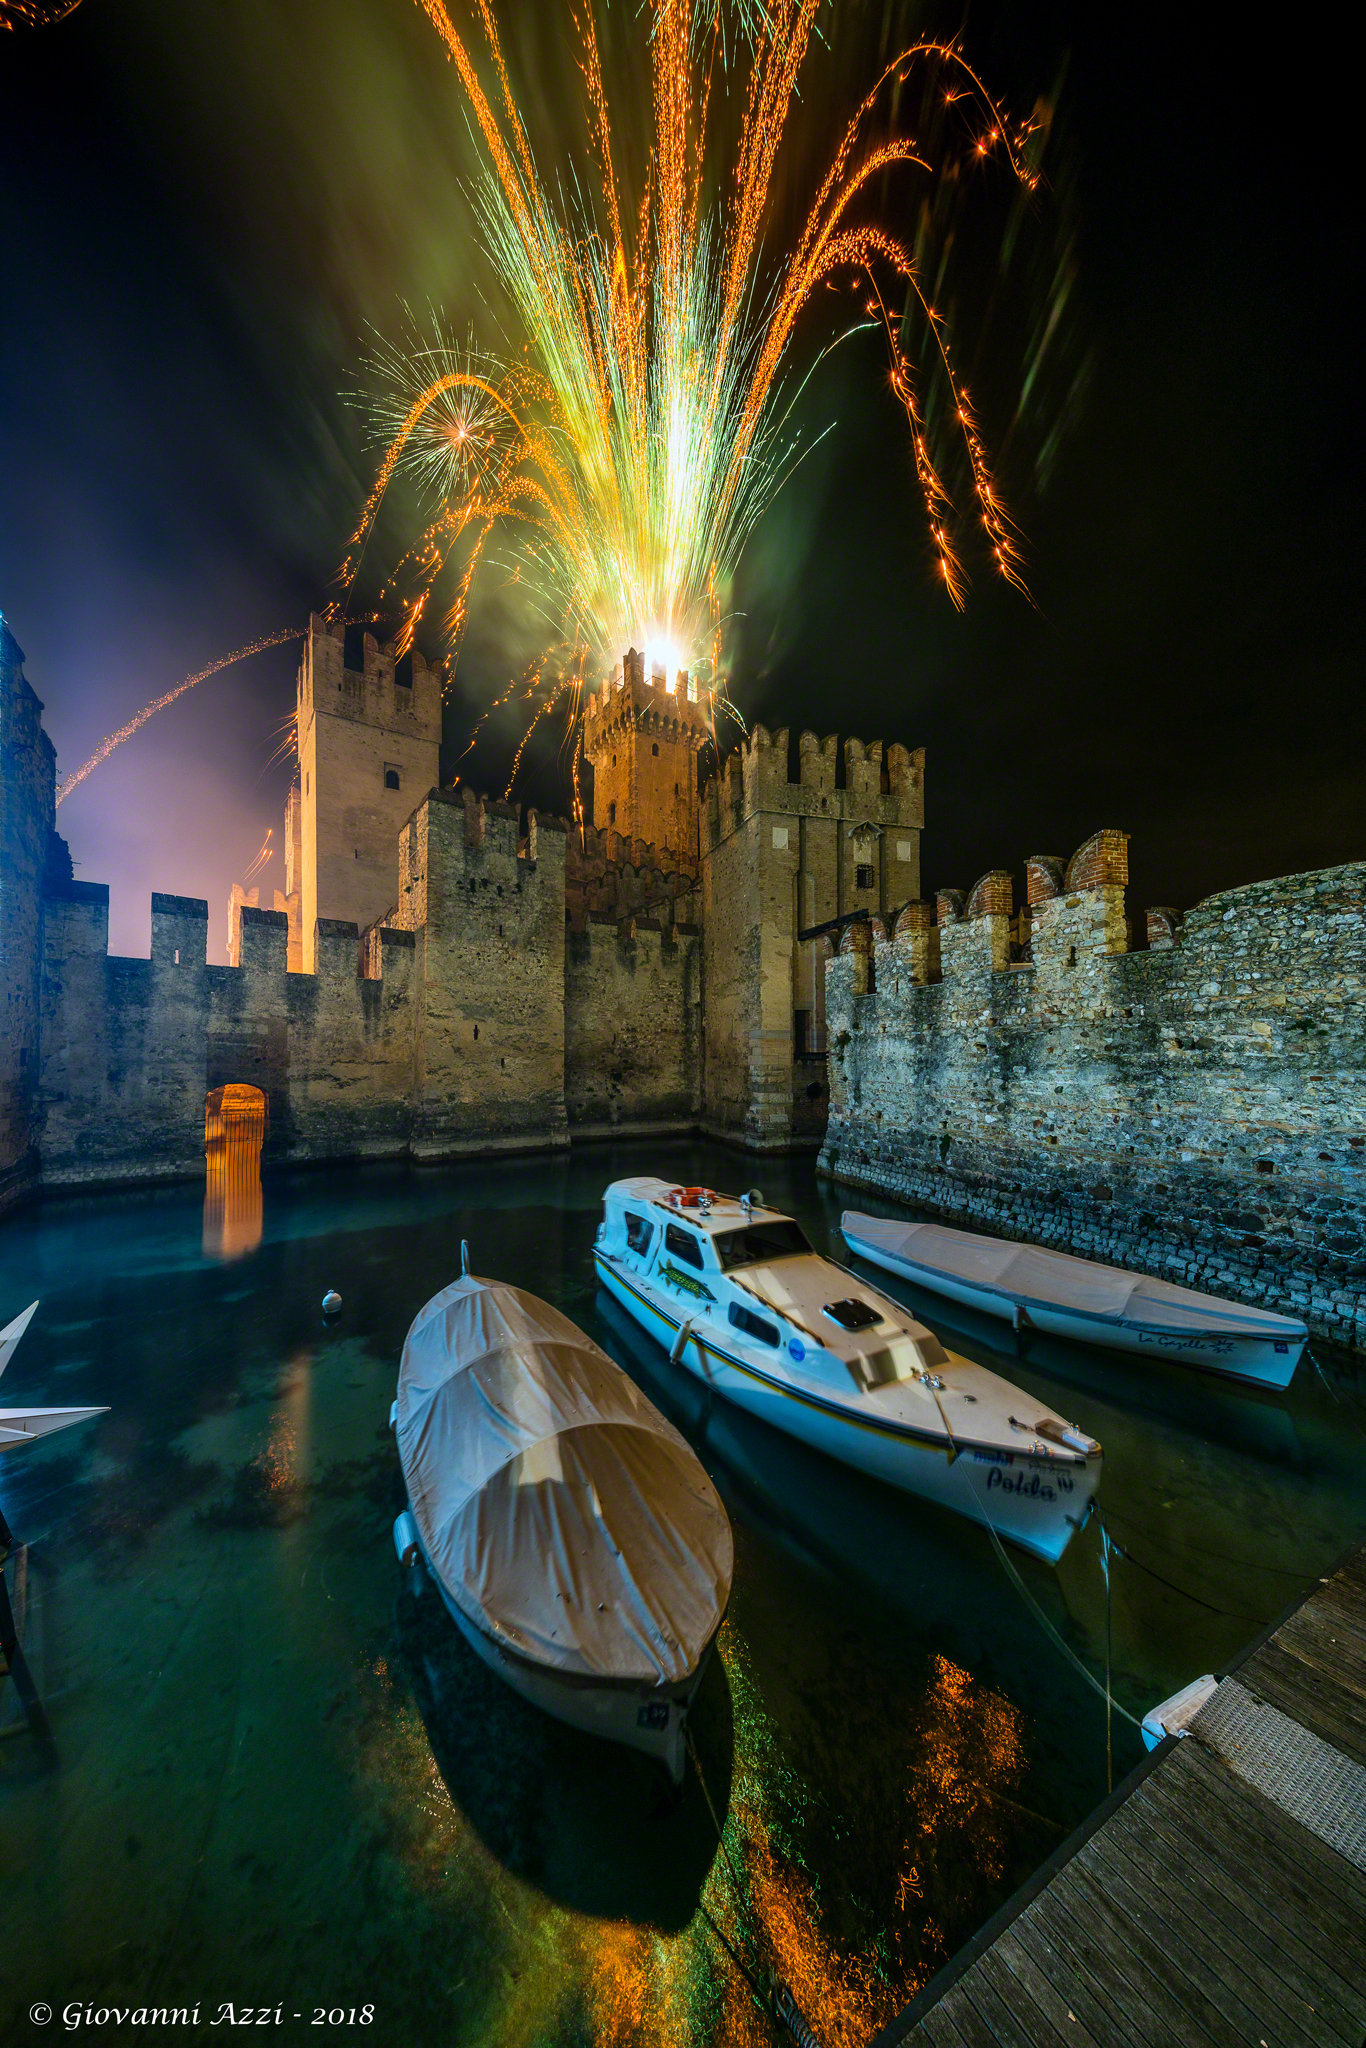 Fire of the castle of Sirmione...